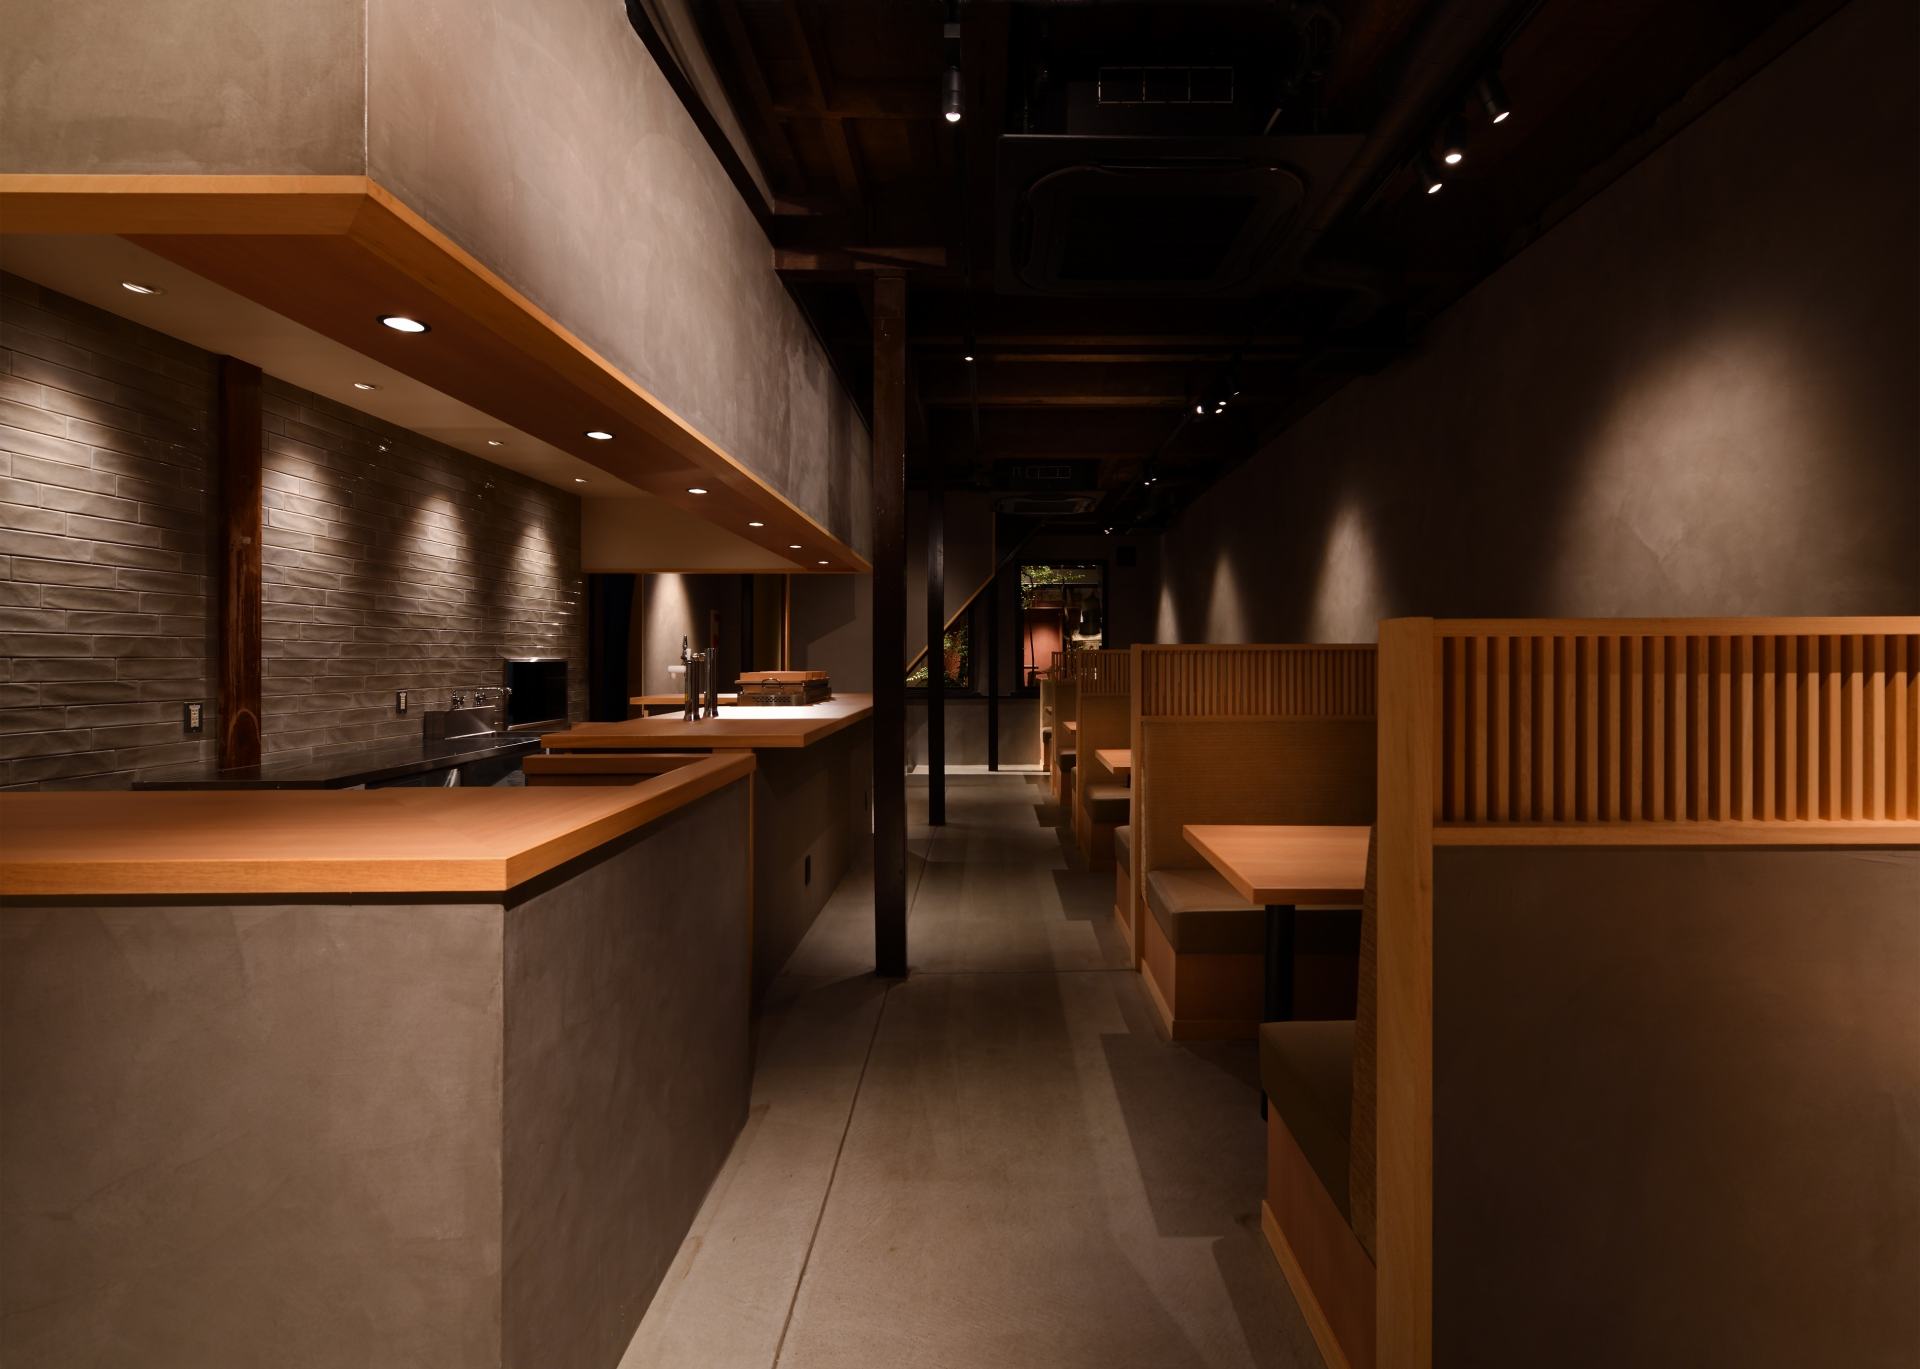 A Modern Space Created from the Renovation of a Kyoto Machiya Over 100 Years Old